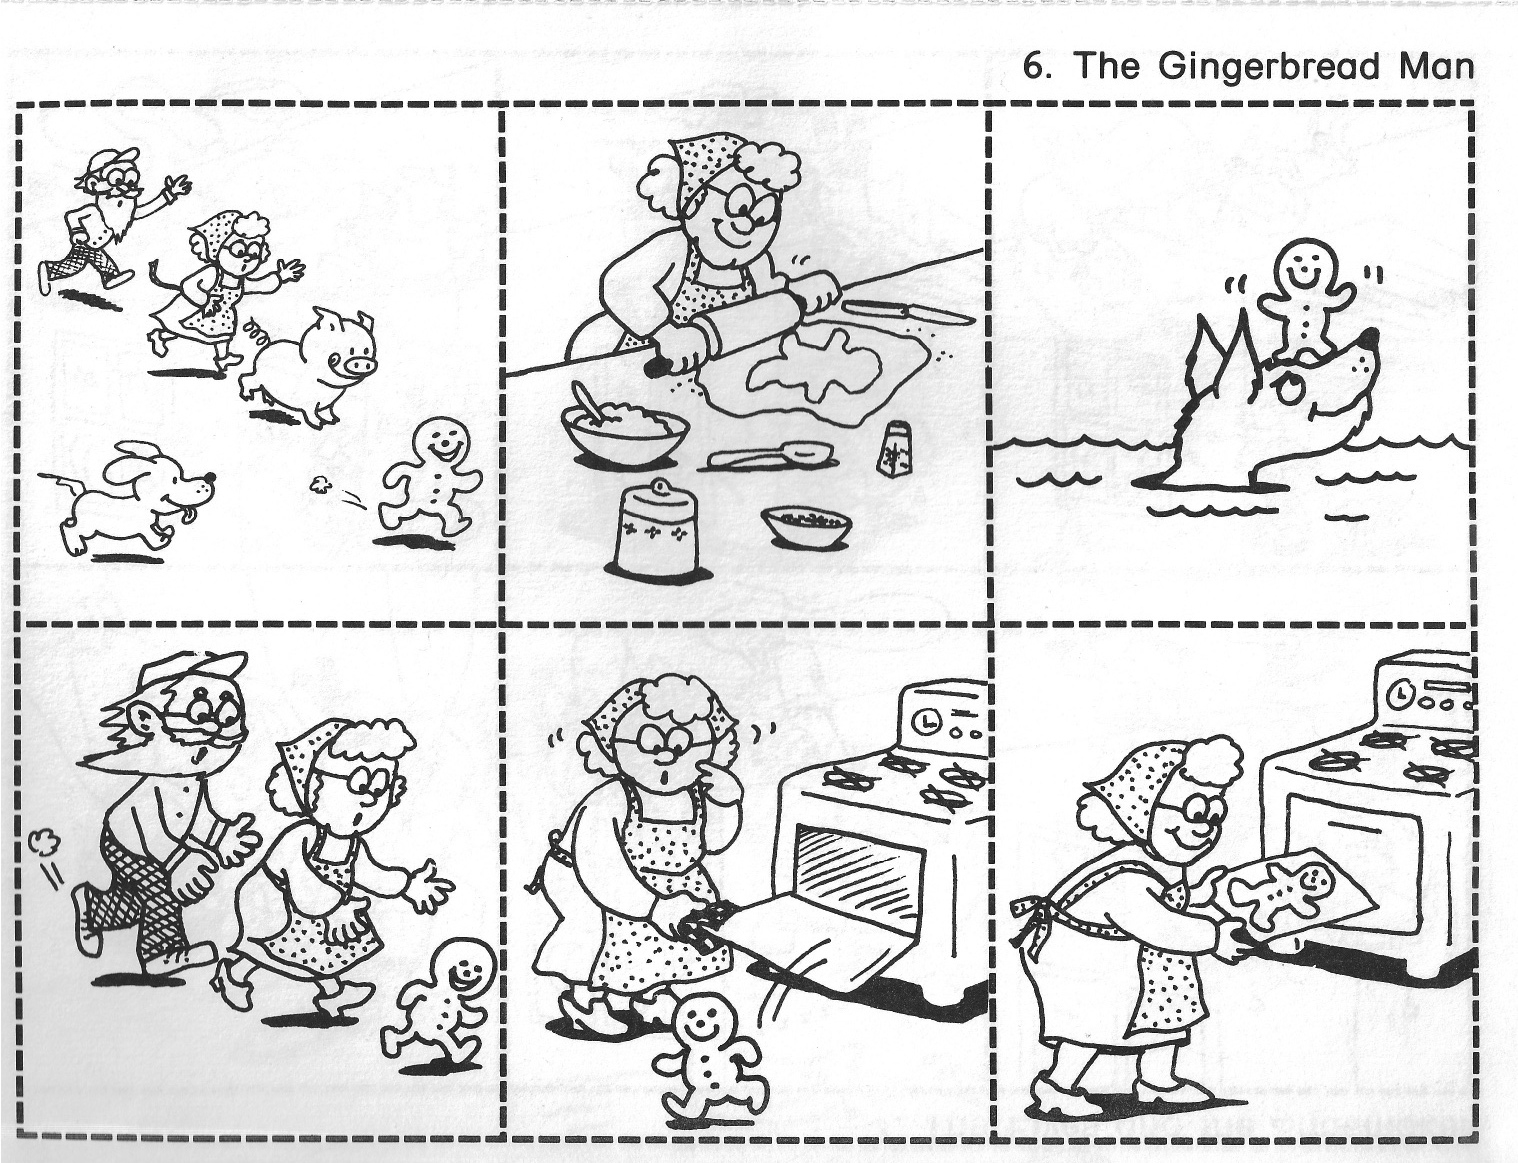 Printable Version Of The Gingerbread Man Story | Download Them Or Print - Free Printable Version Of The Gingerbread Man Story